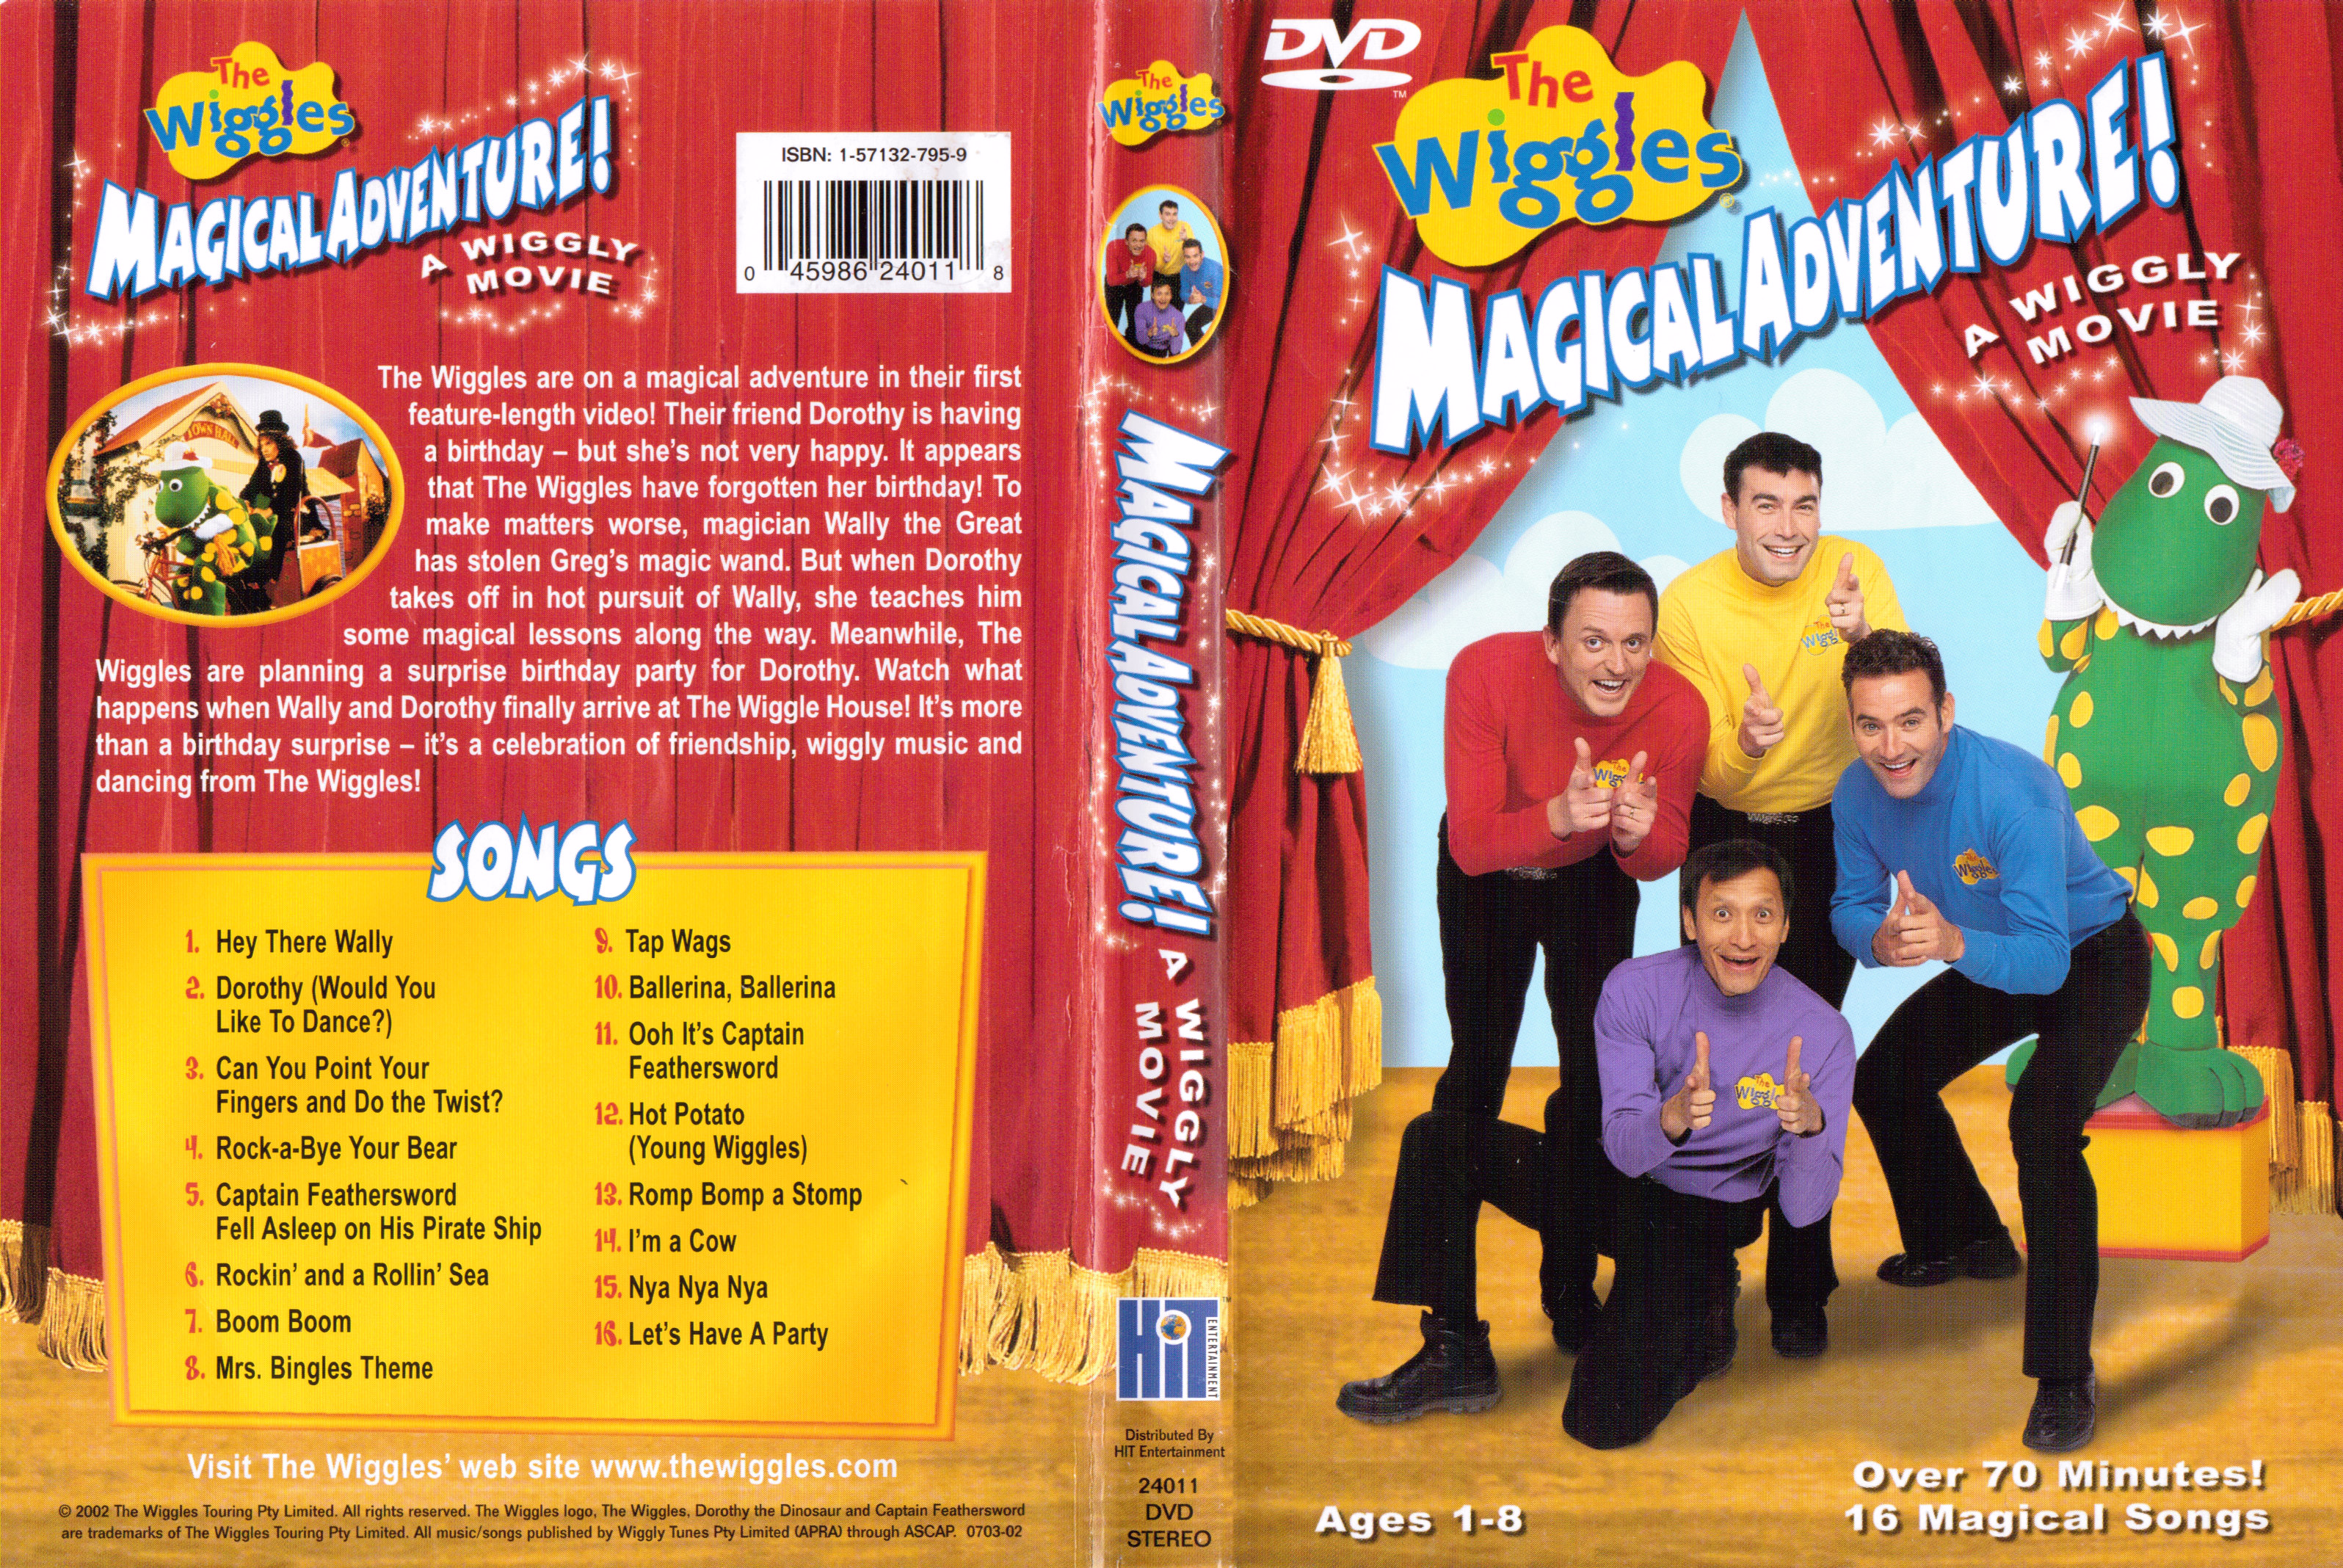 Wiggles Magical Adventure A Wiggly Movie. 